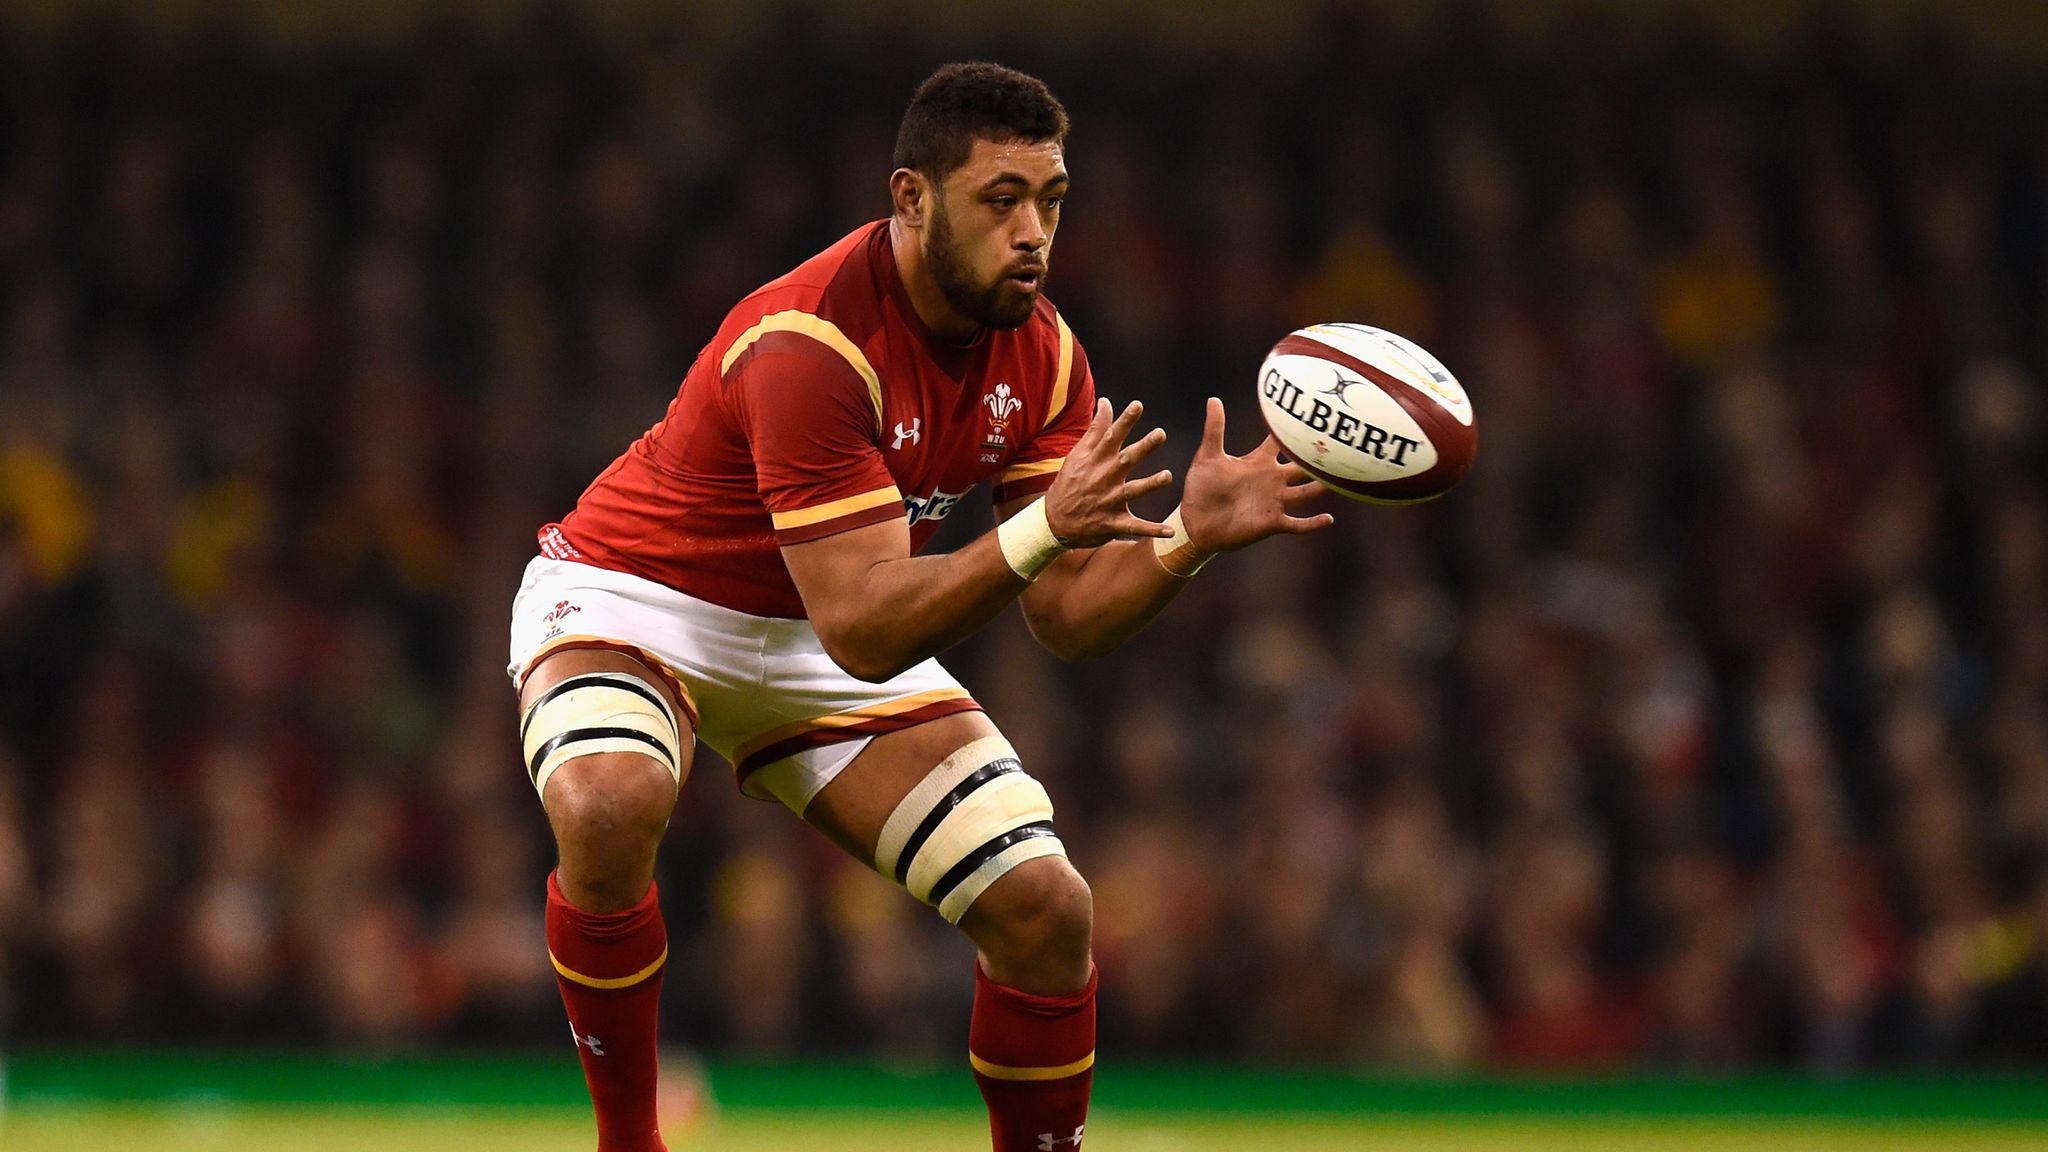 Wales duo Taulupe Faletau and Luke Charteris to miss Six Nations opener Rugby Union News Sky Sports